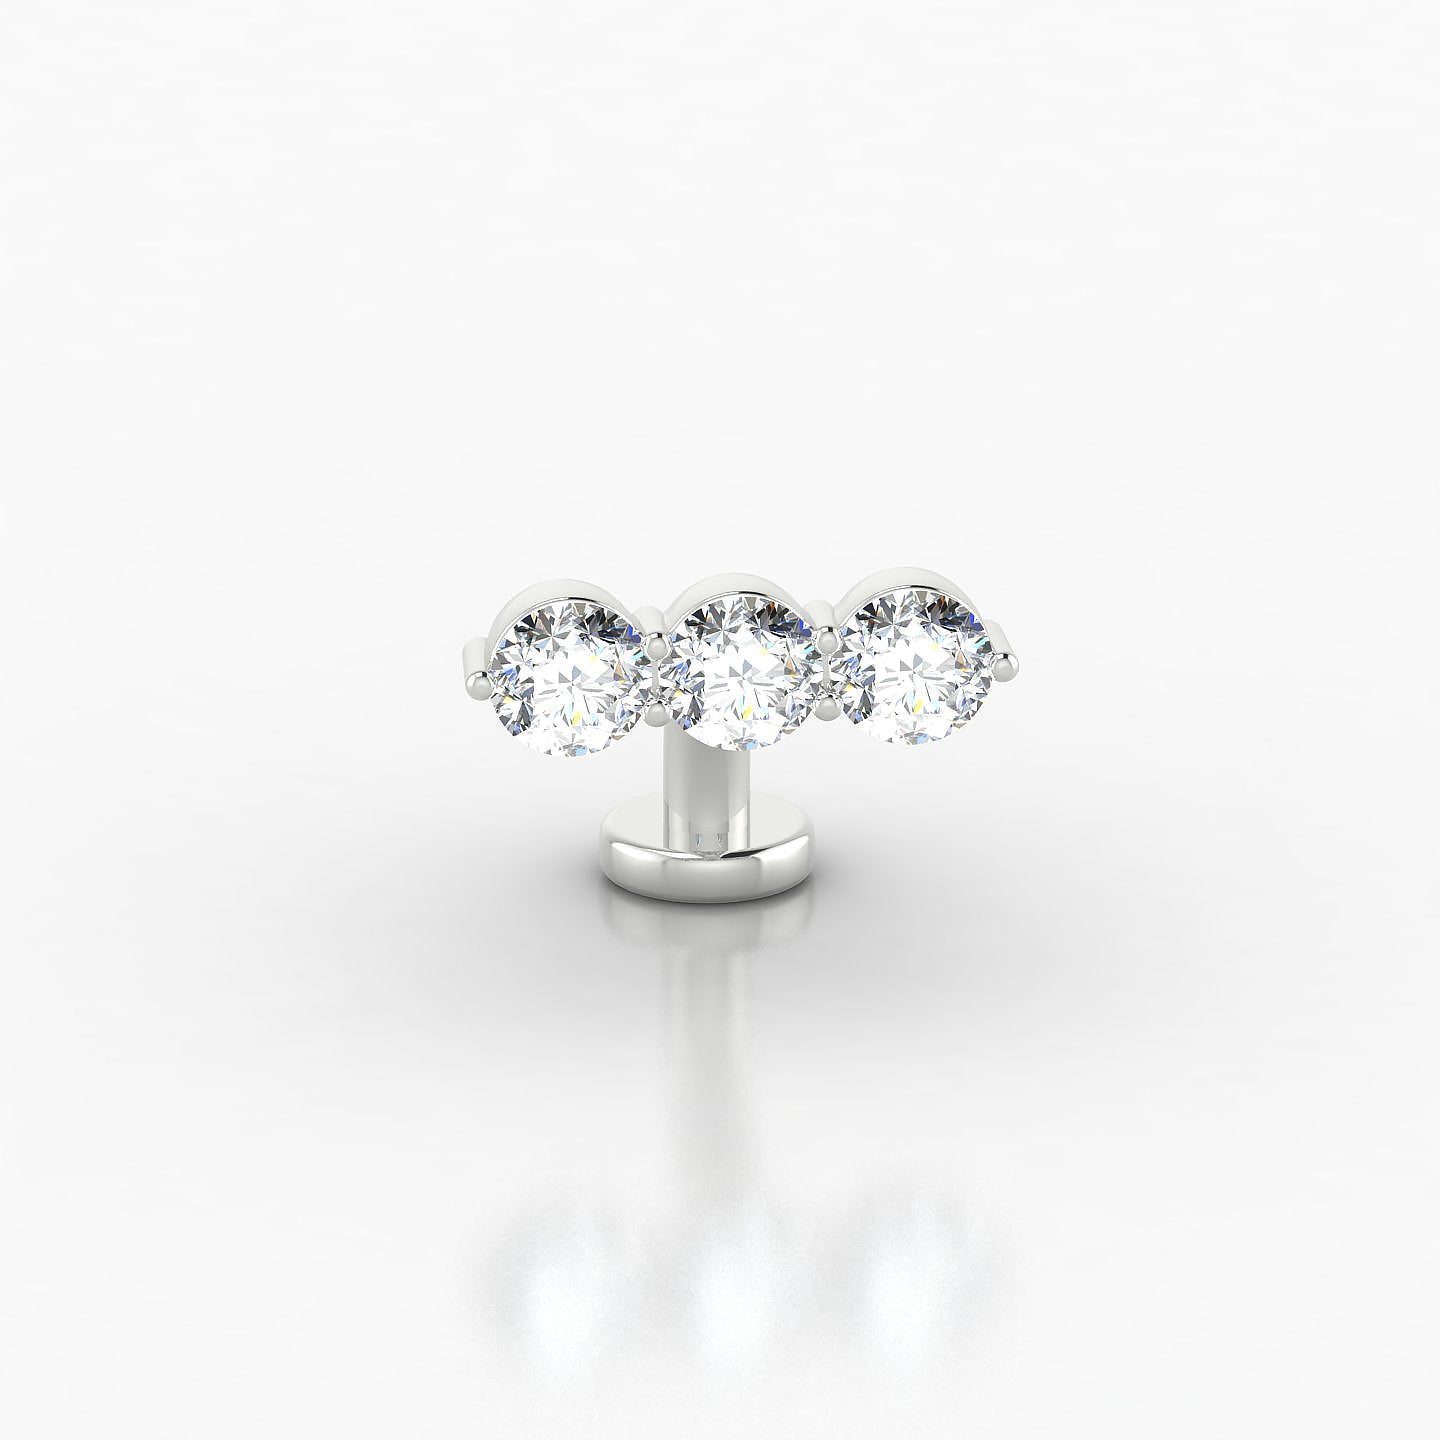 Ma'at | 18k White Gold 8 mm 10 mm Trilogy Diamond Floating Navel Piercing